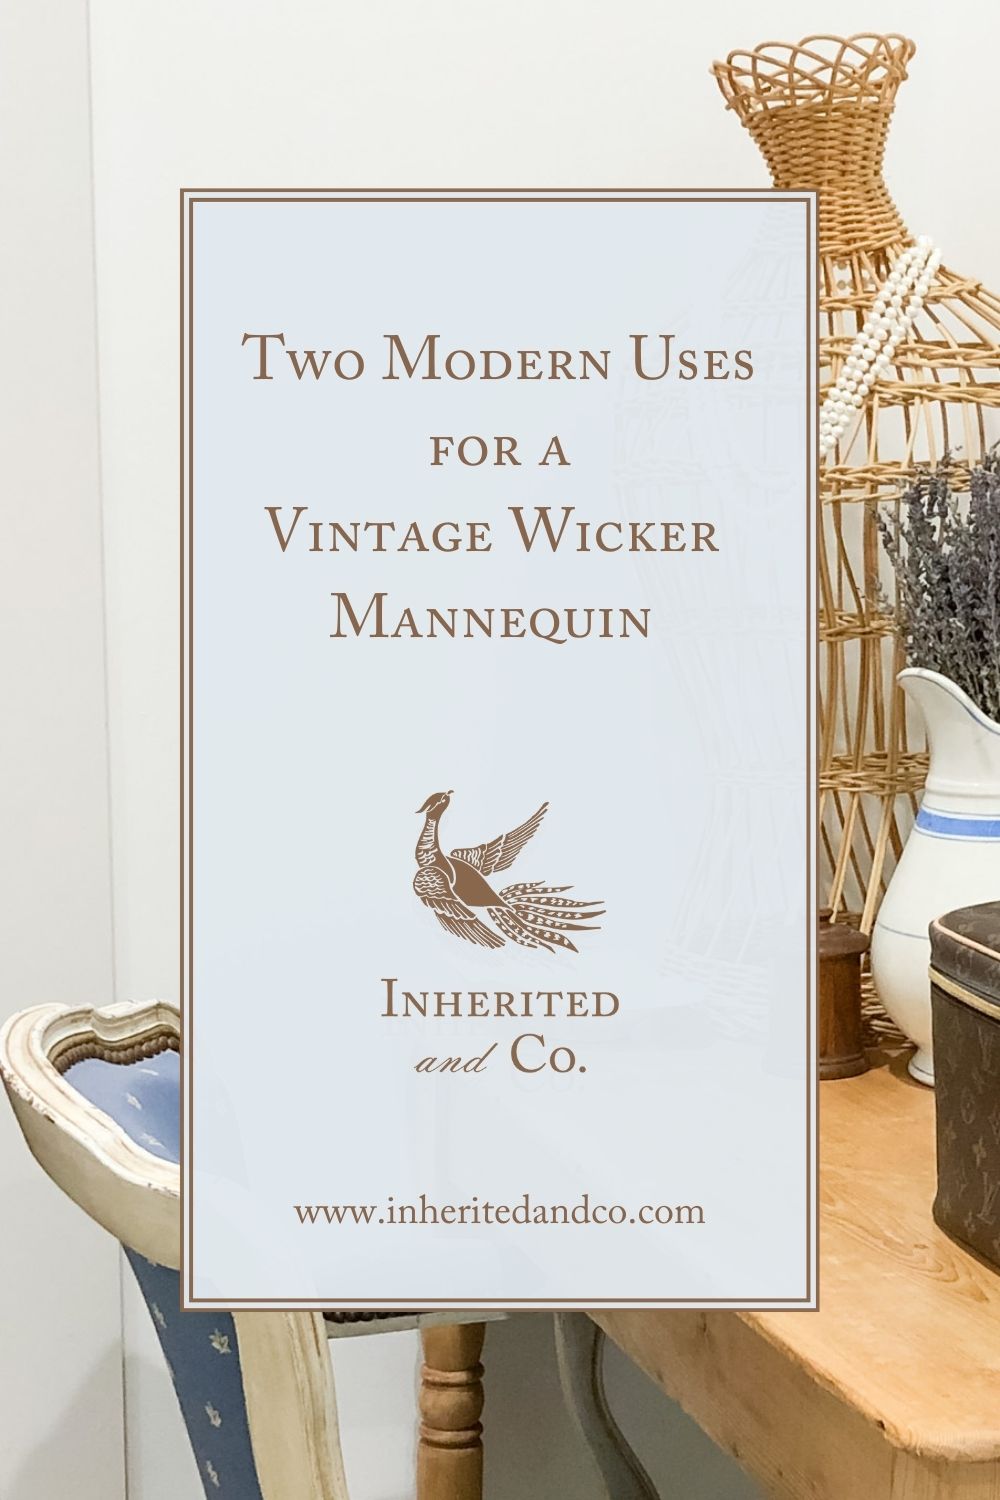 Two Modern Uses for a Vintage Wicker Mannequin